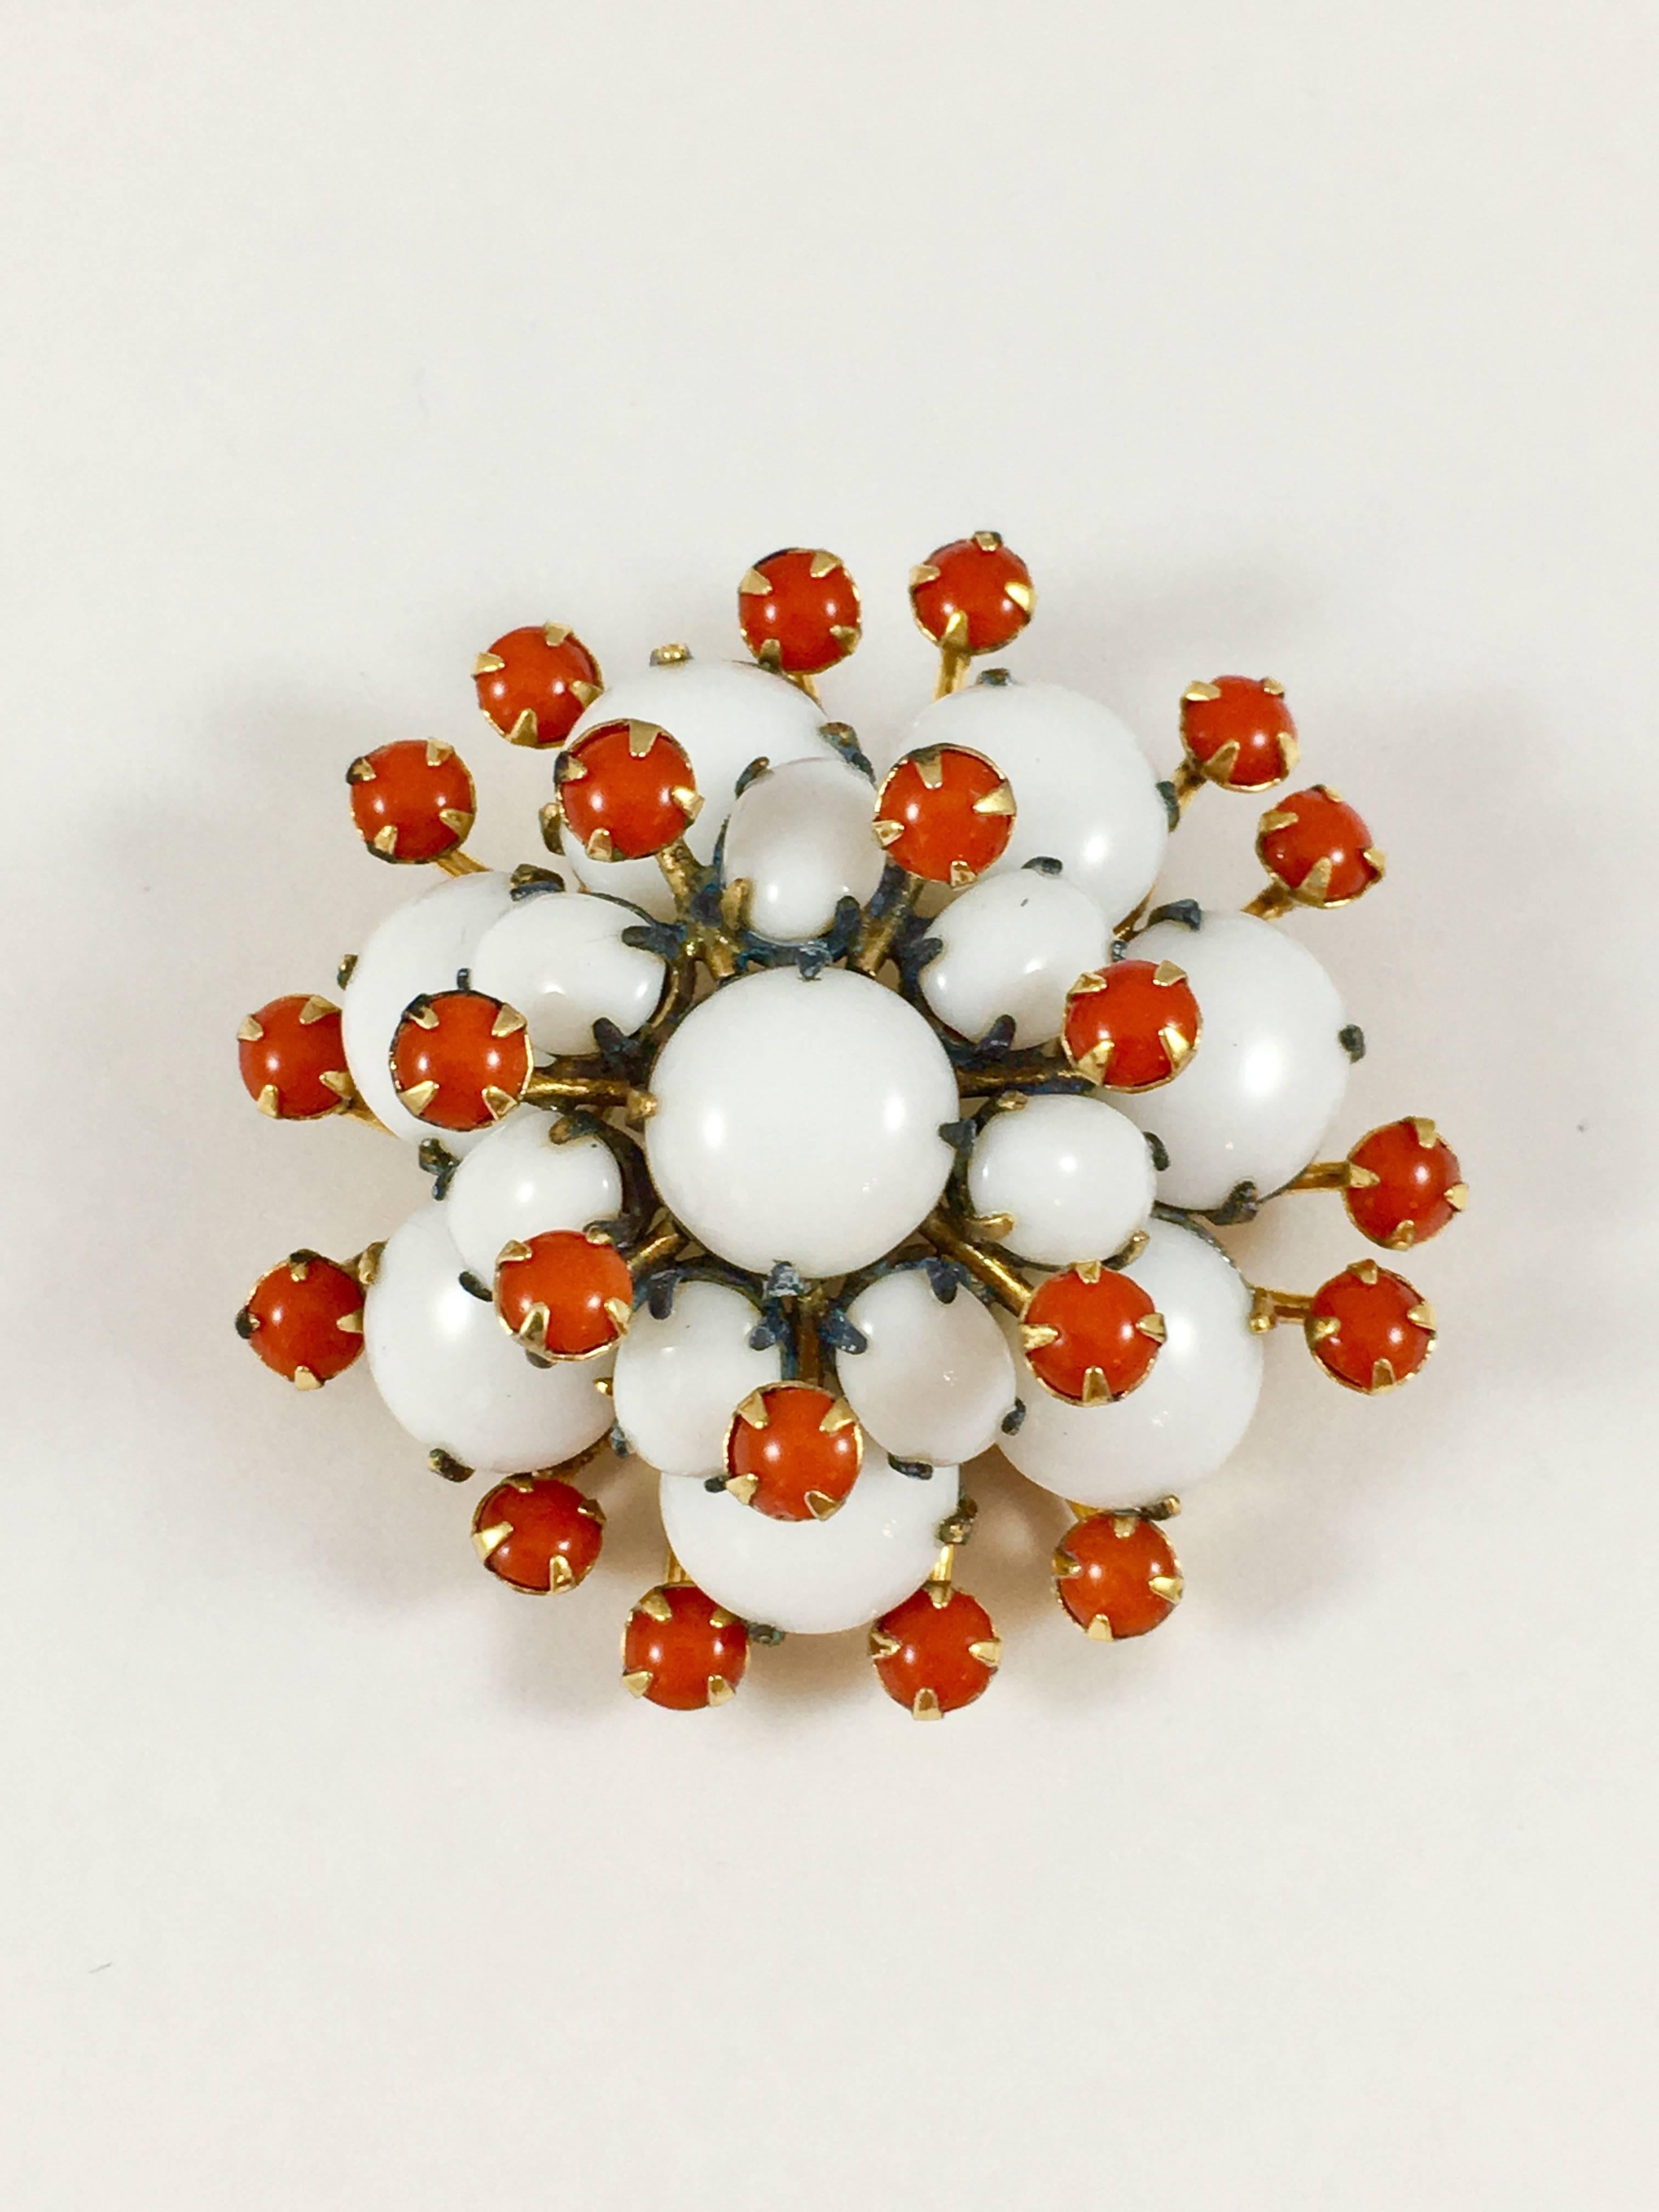 This is an impressive 1950s Schreiner brooch and earring set. The pieces are very three-dimensional. They are made out of a gold-tone base metal and white and orange glass stones. The brooch has a diameter of 1 7/8" and is marked 'Schreiner' in